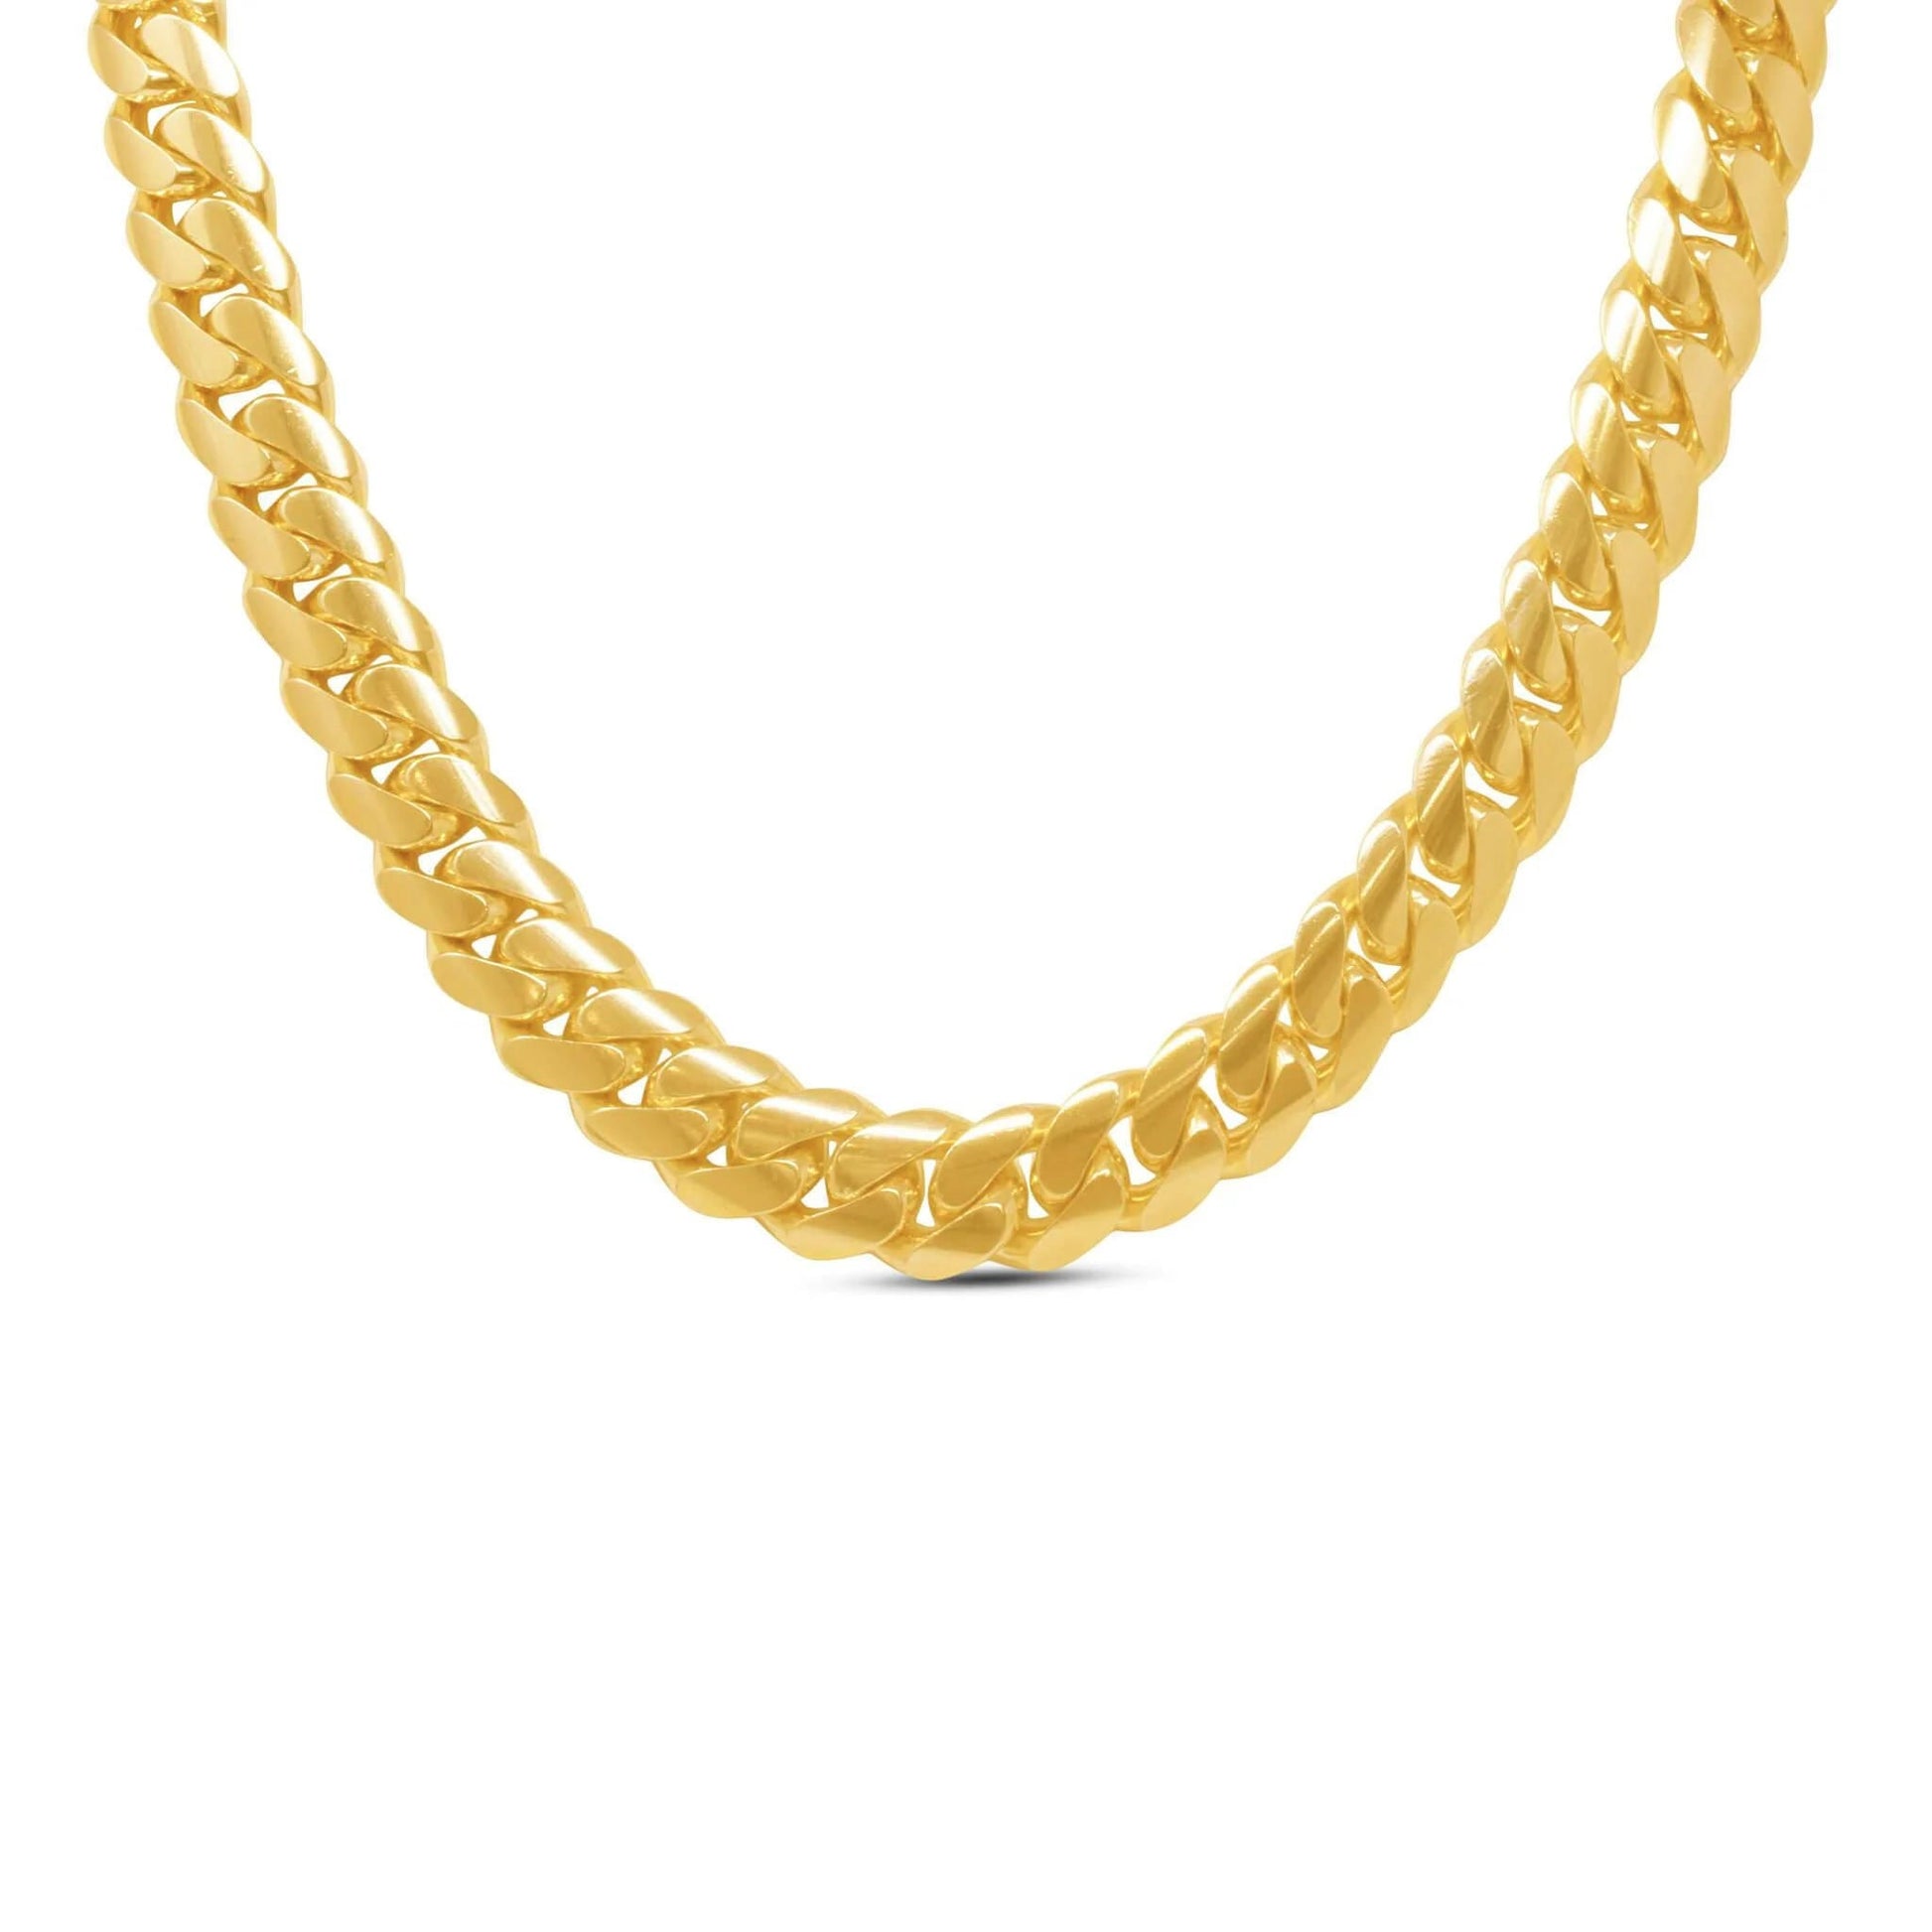 15mm Miami Cuban Link Bracelet in 10K Solid Yellow Gold - Vera Jewelry in Miami